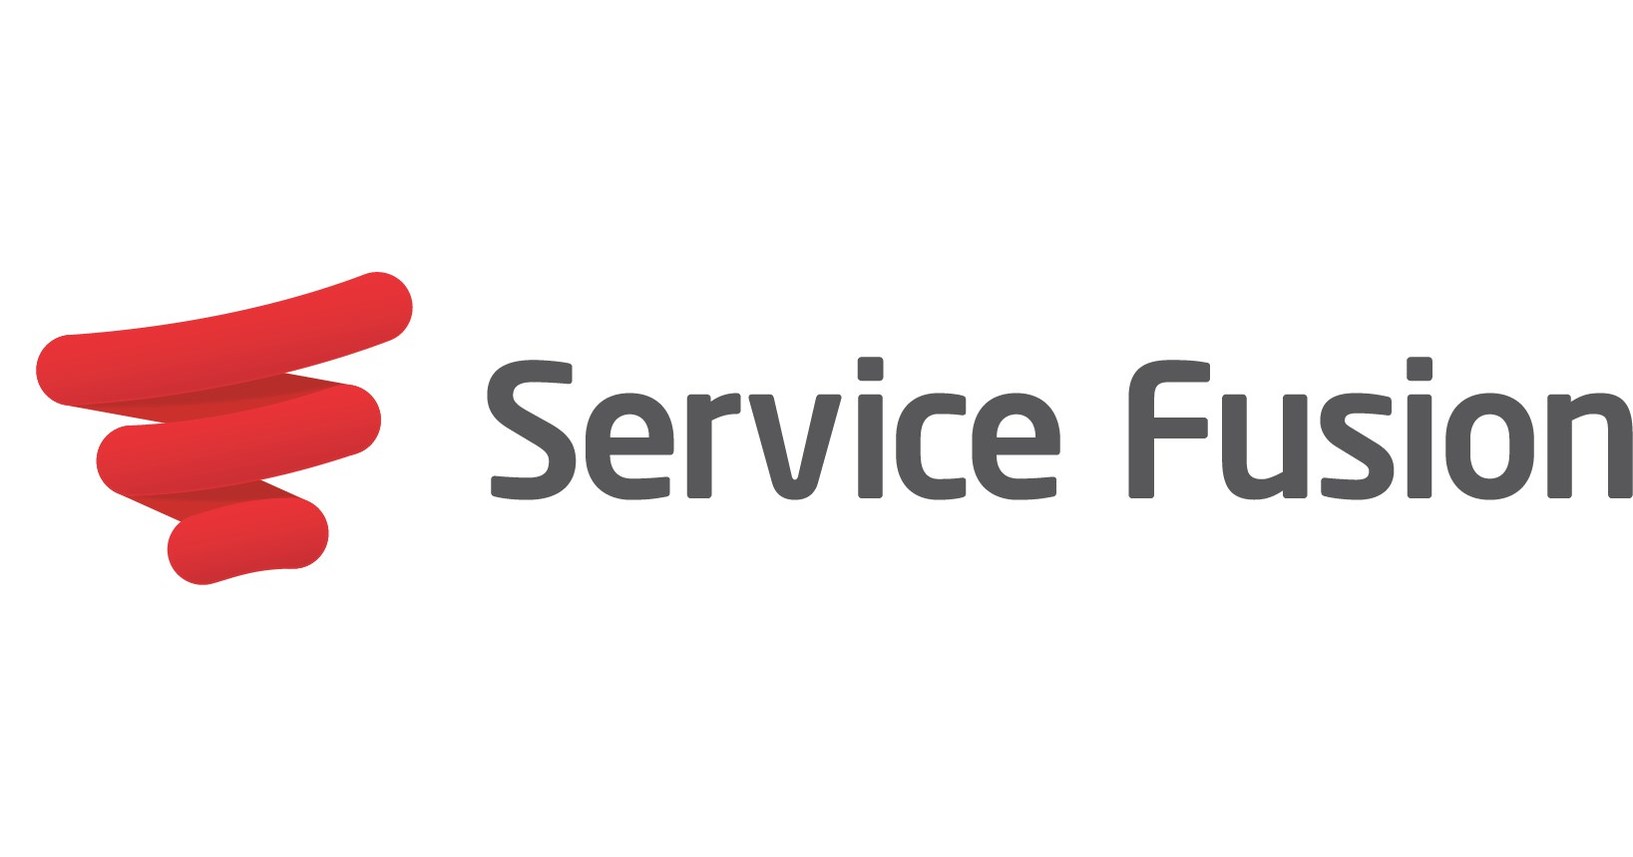 Service Fusion Integrates with Trane and American Standard to Simplify HVAC Dealer sales Process